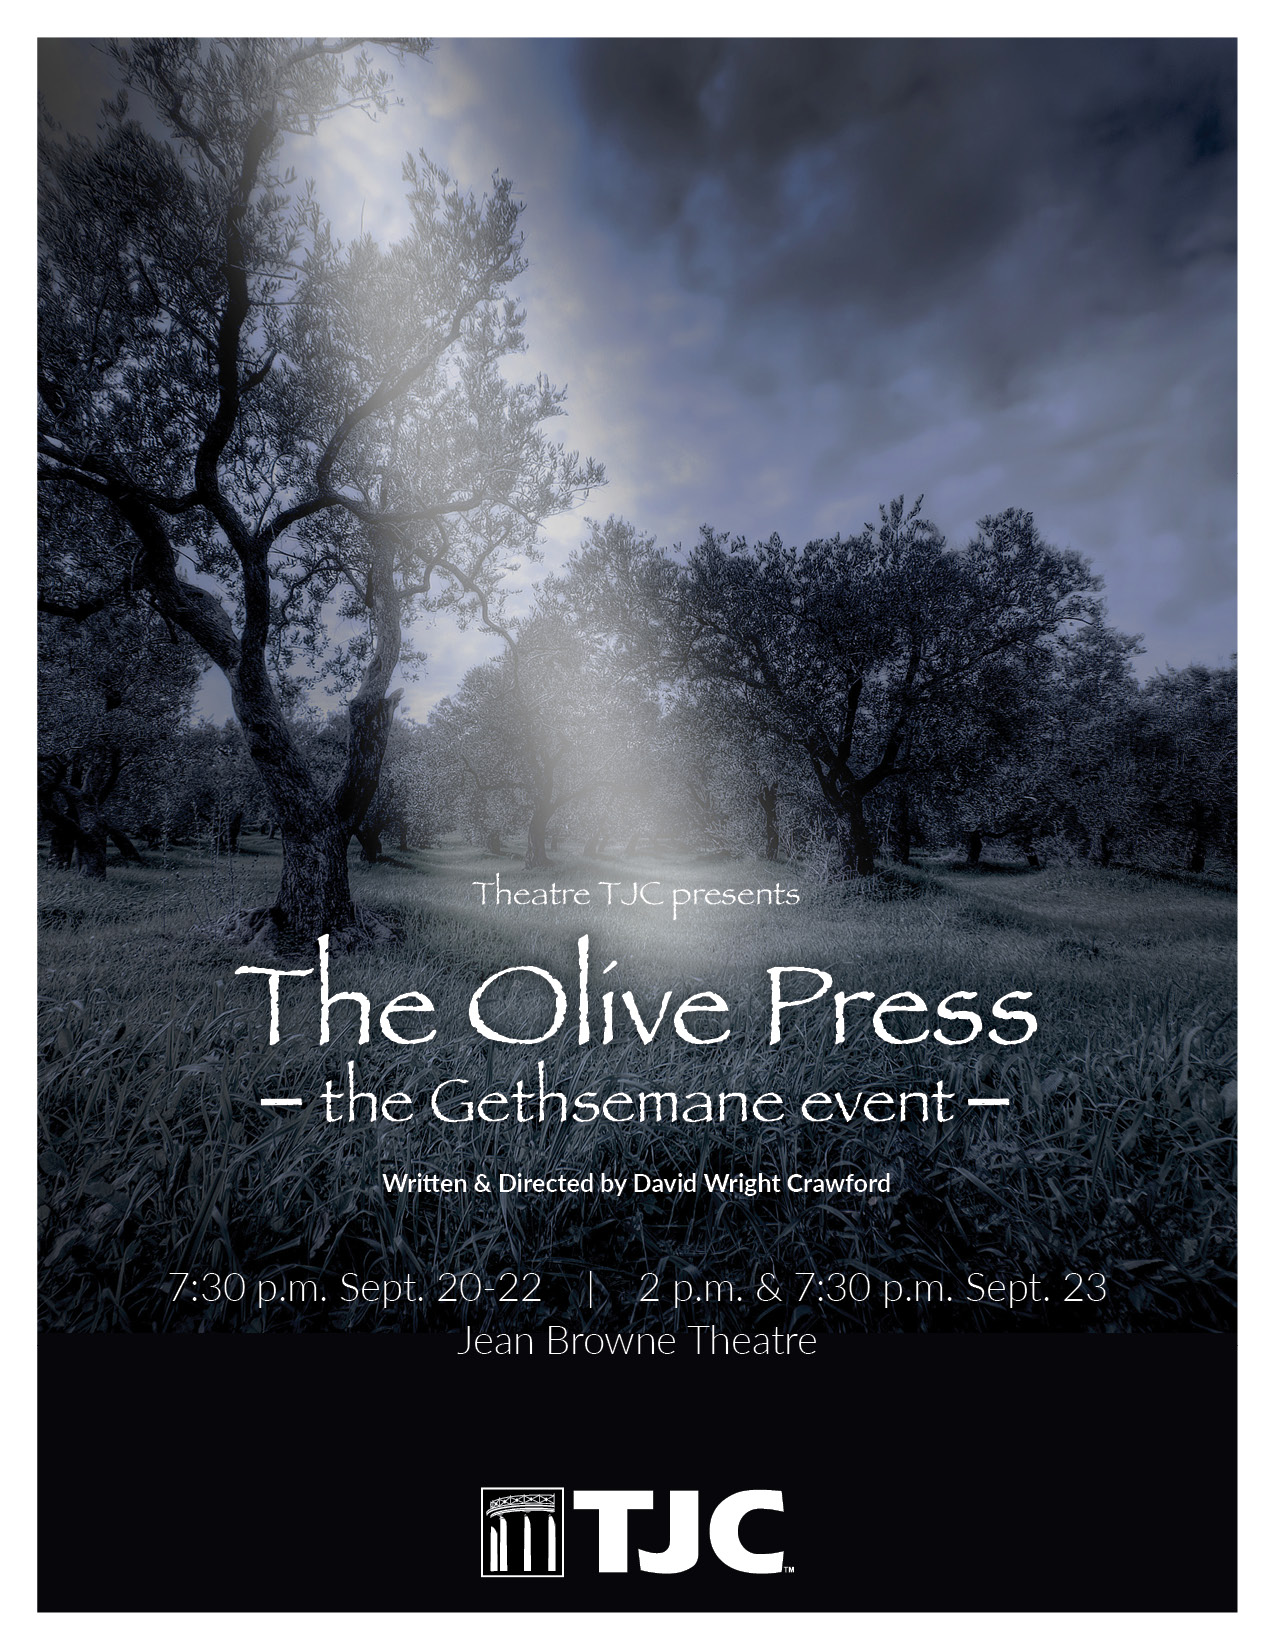 The flier for The Olive Press